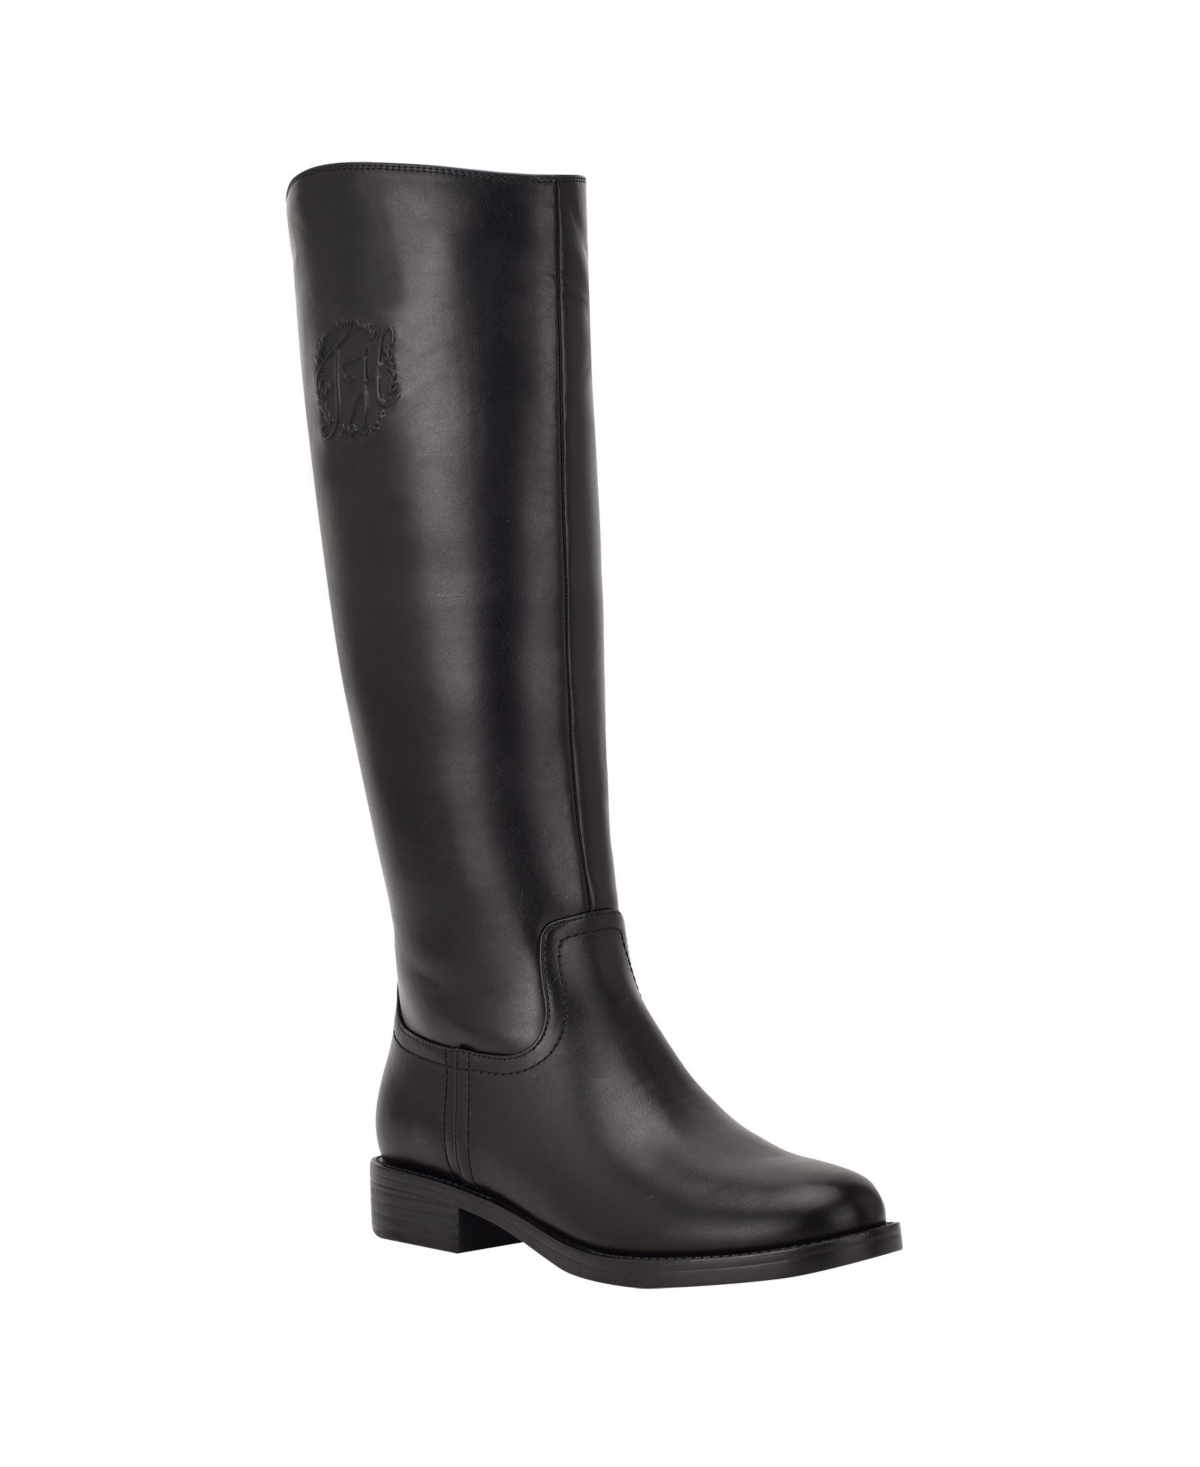 UPC 195972718050 product image for Tommy Hilfiger Women's Rydings Riding Boots Women's Shoes | upcitemdb.com